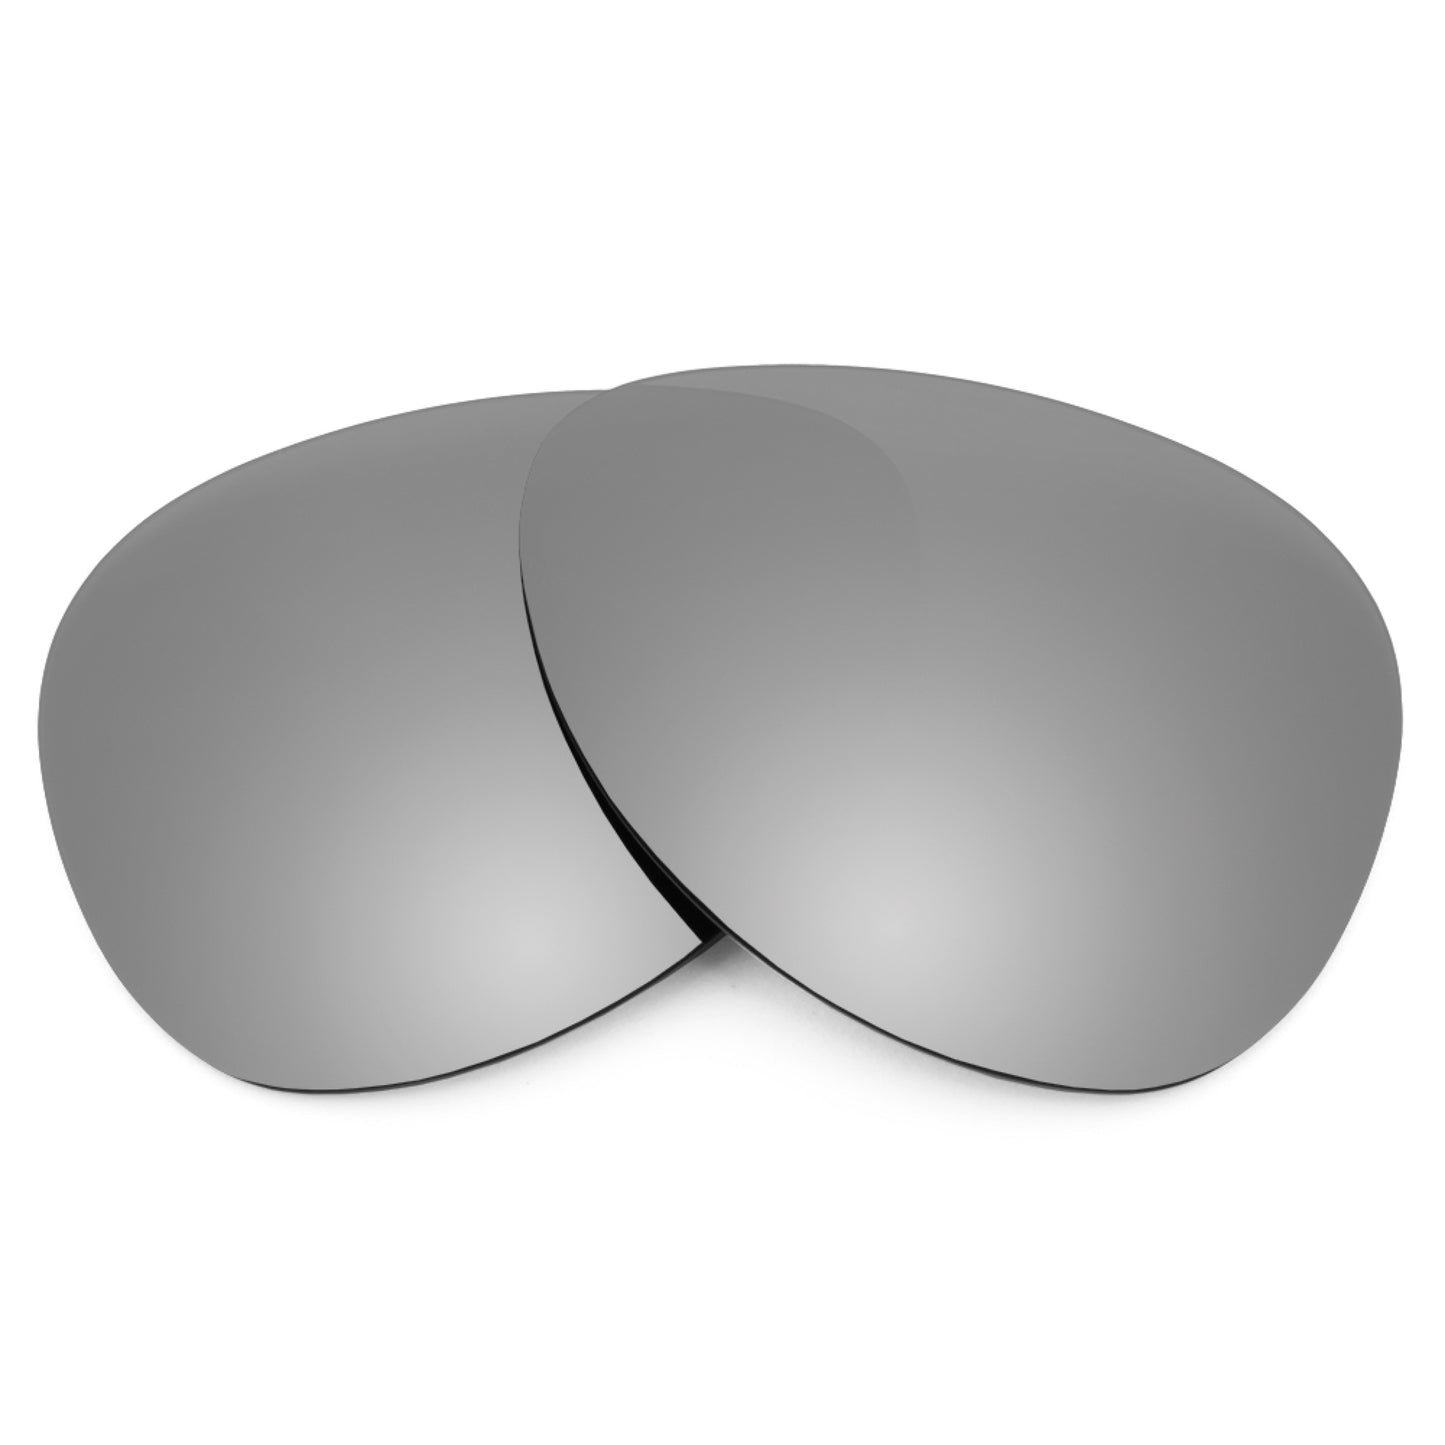 Revant replacement lenses for Ray-Ban RB3386 67mm Non-Polarized Titanium